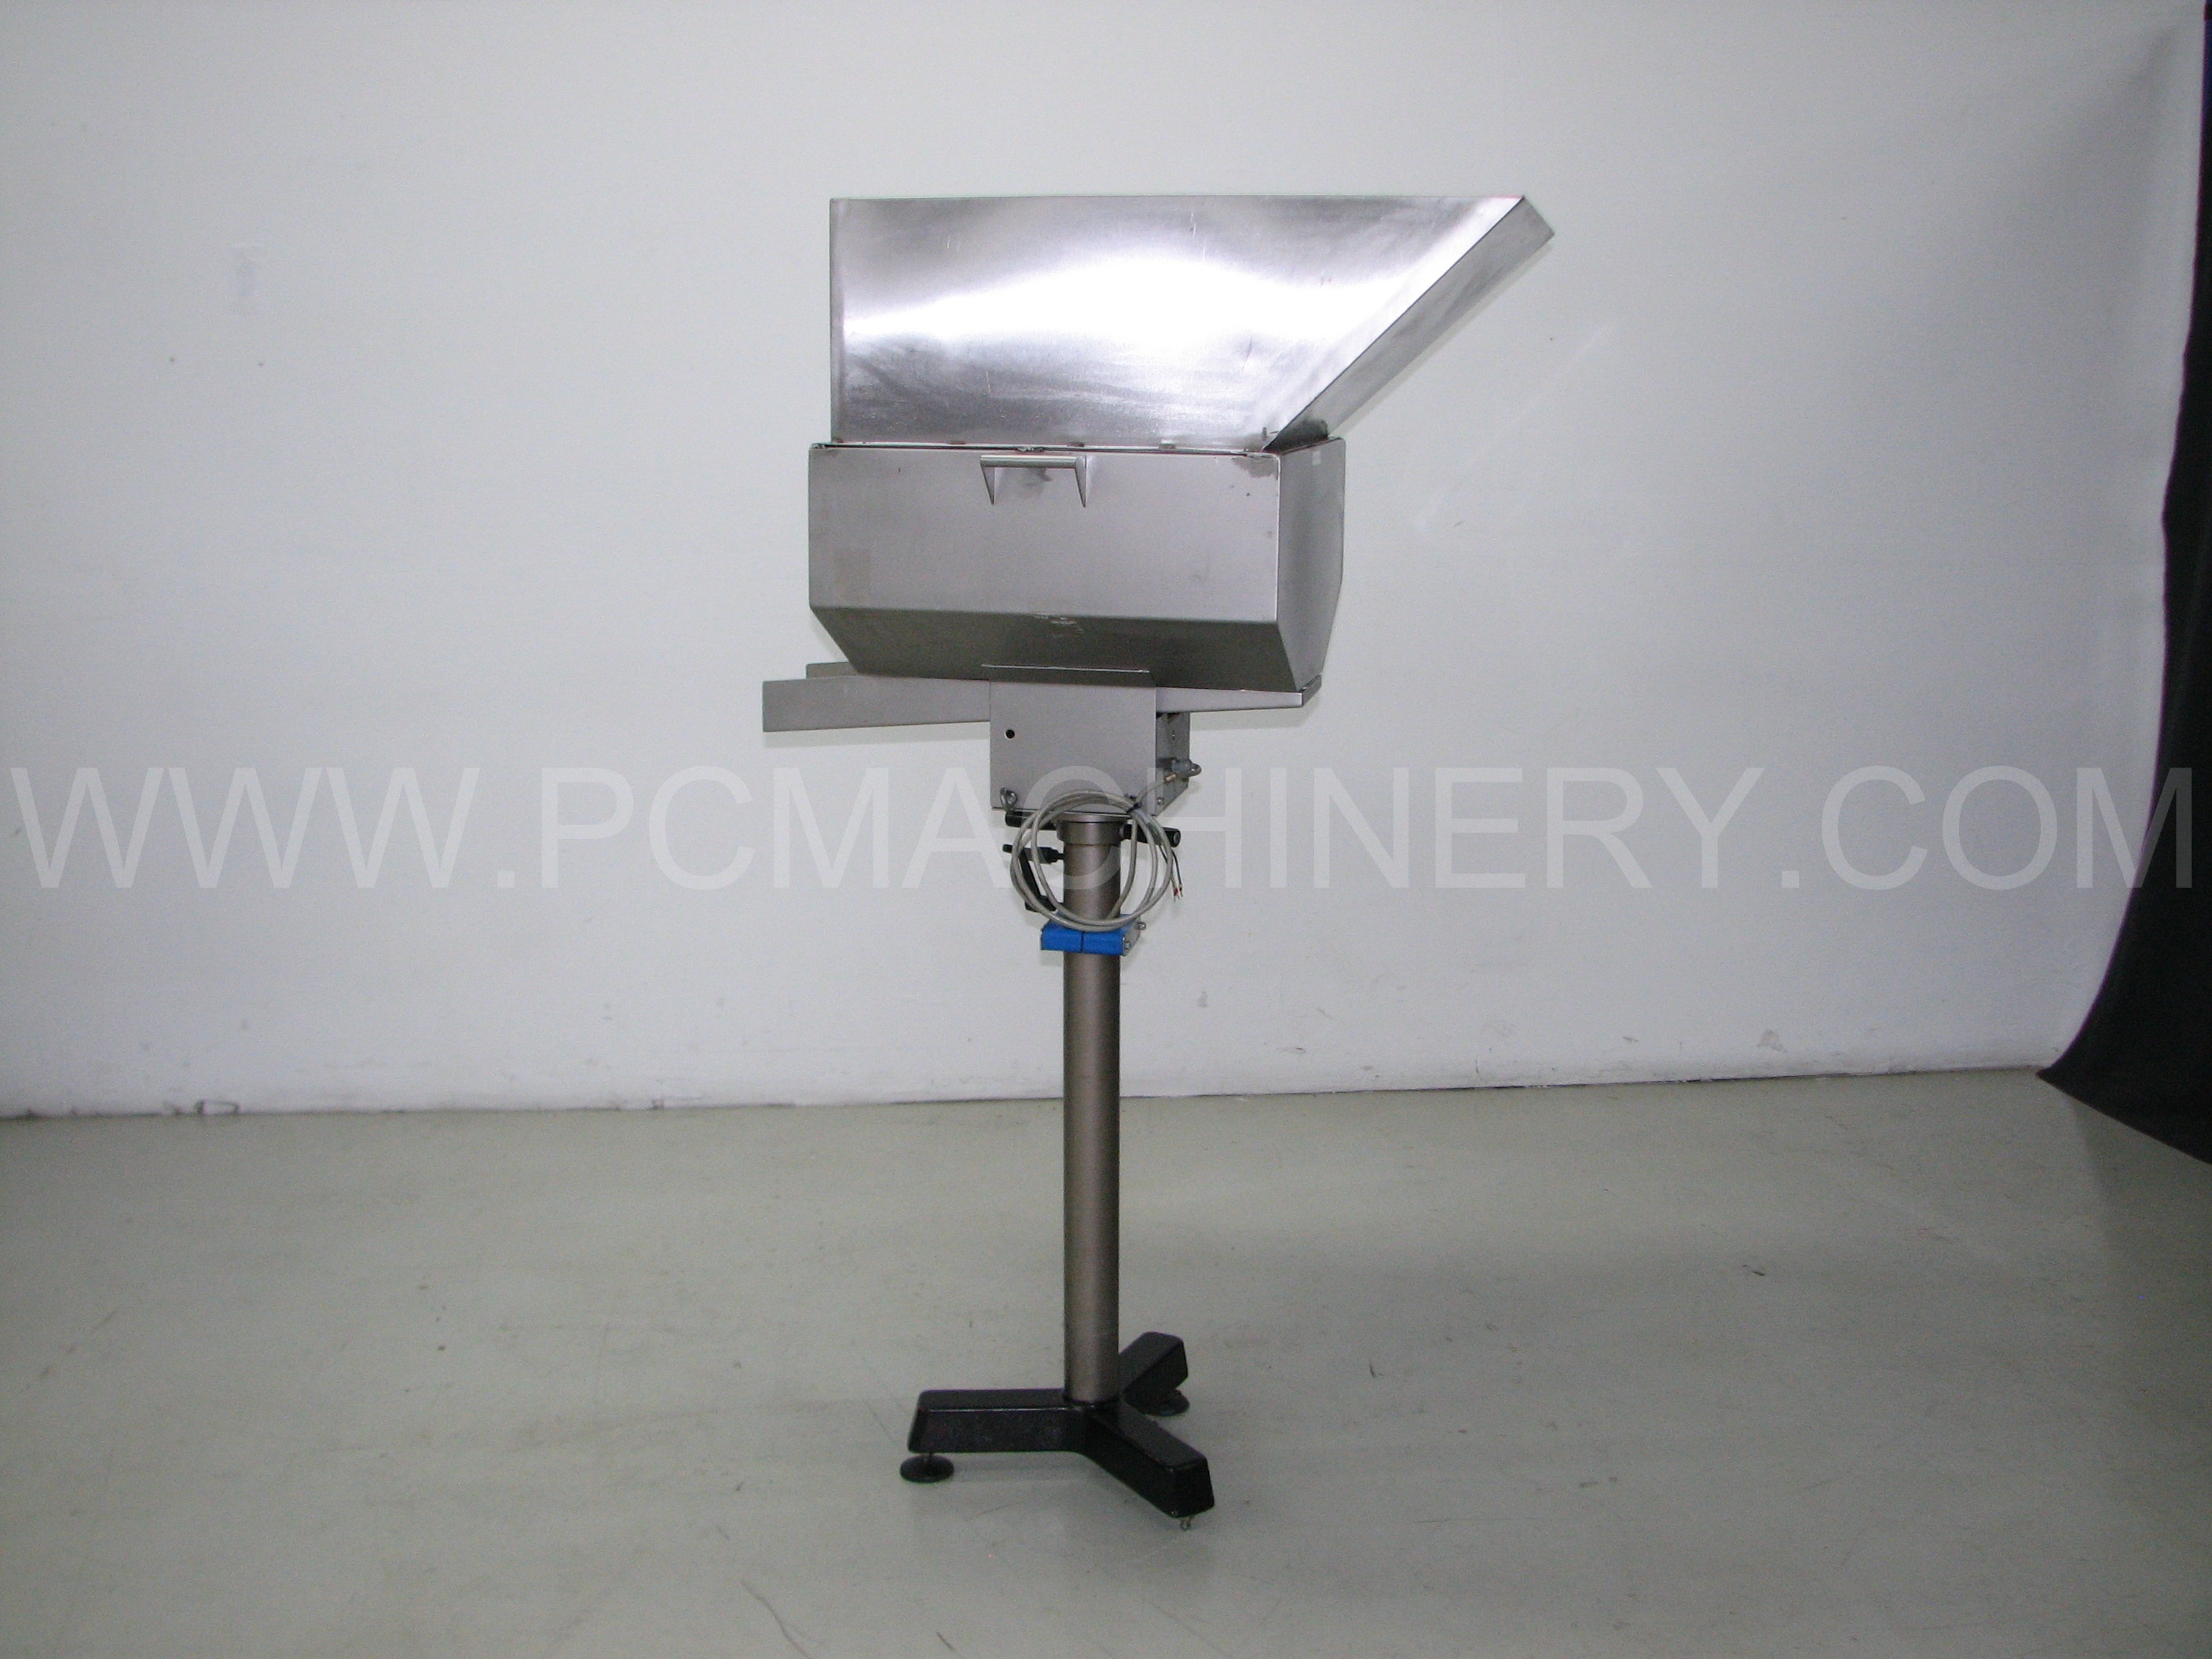 Used Stainless steel Orientech vibratory cap feeder with chute